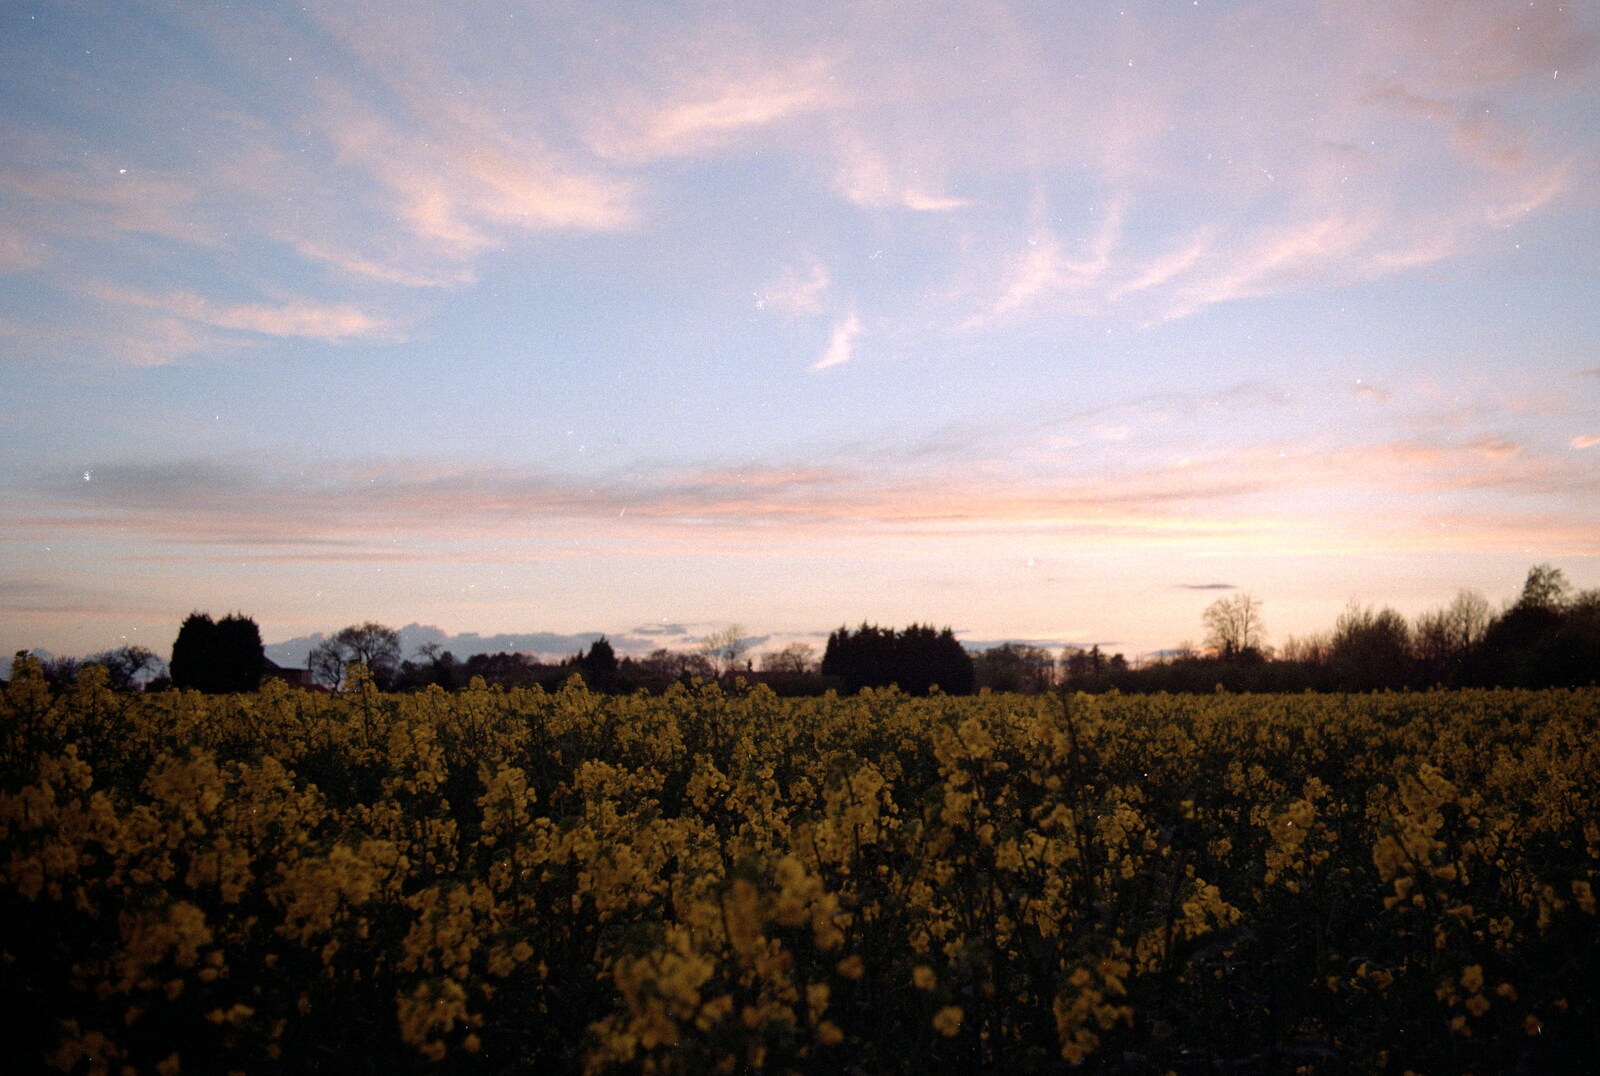 A sunset and a field of Oilseed in flower from A Postcard From Hofburg Palace, Vienna, Austria - 18th April 2000